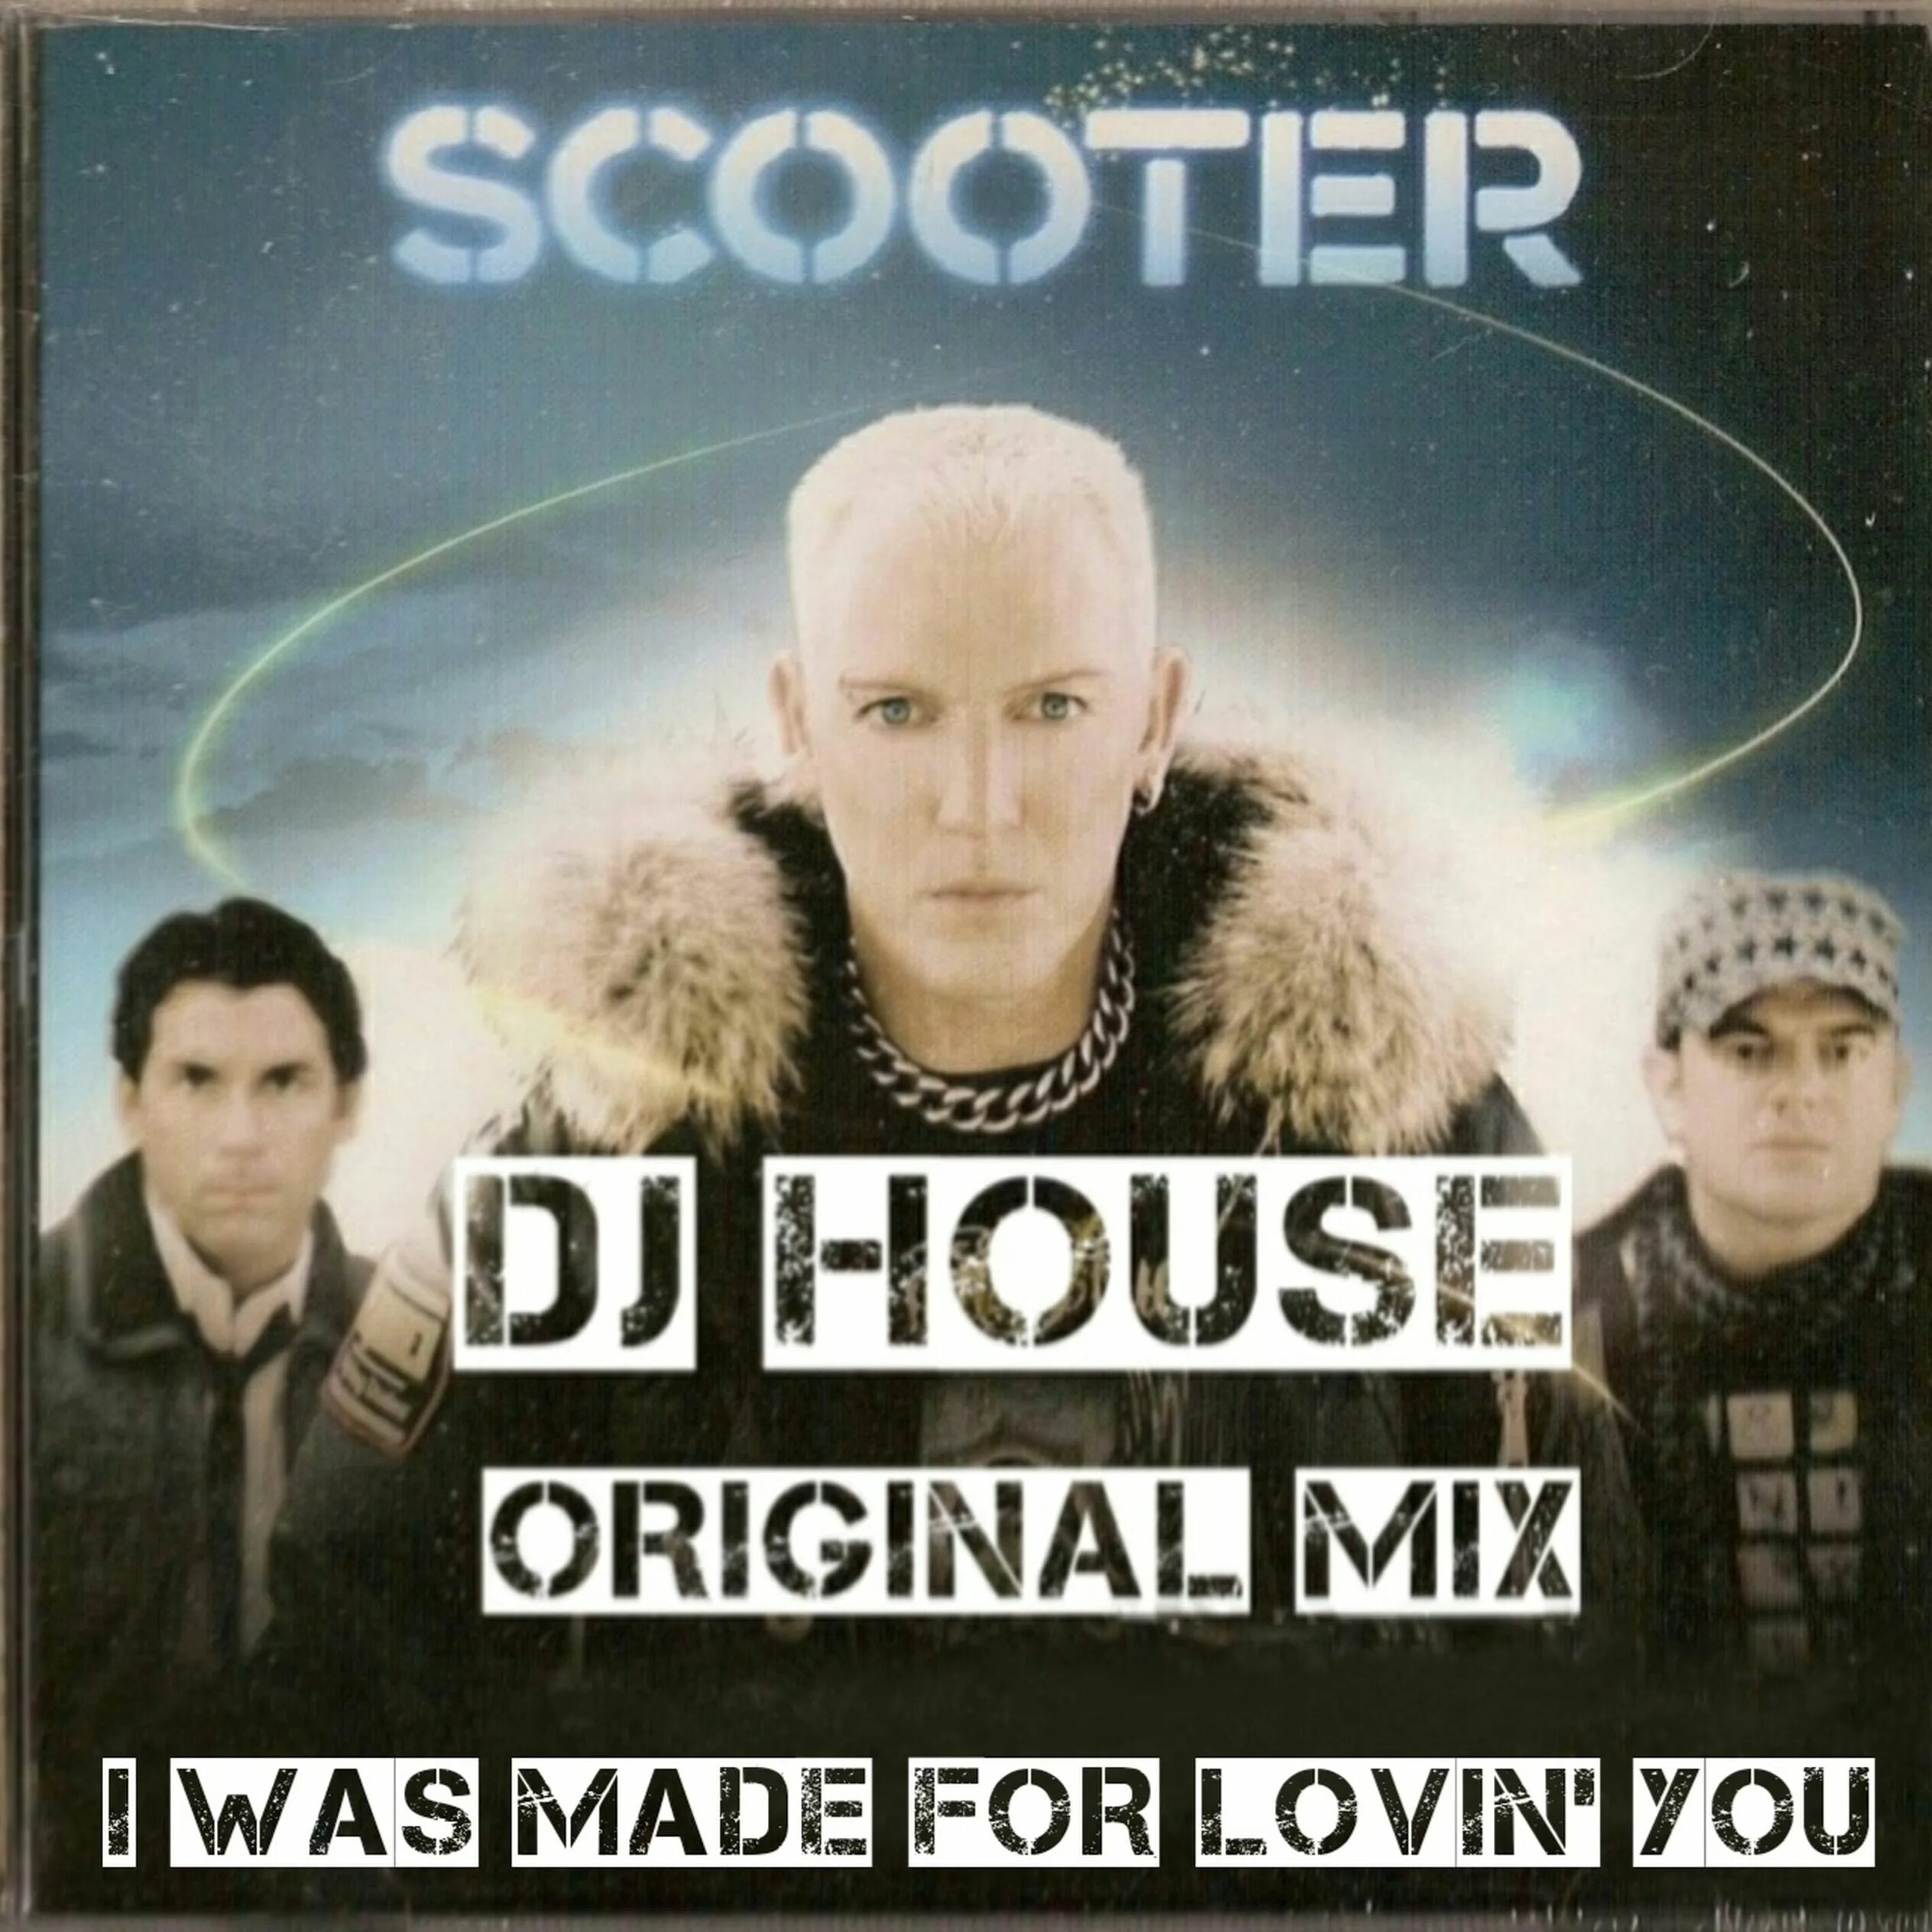 Scooter i was made for loving you Baby. I was made for Lovin' you. Scooter - i was made for Lovin' you обложка альбома. Acid House Scooter. Scooter i keep hearing